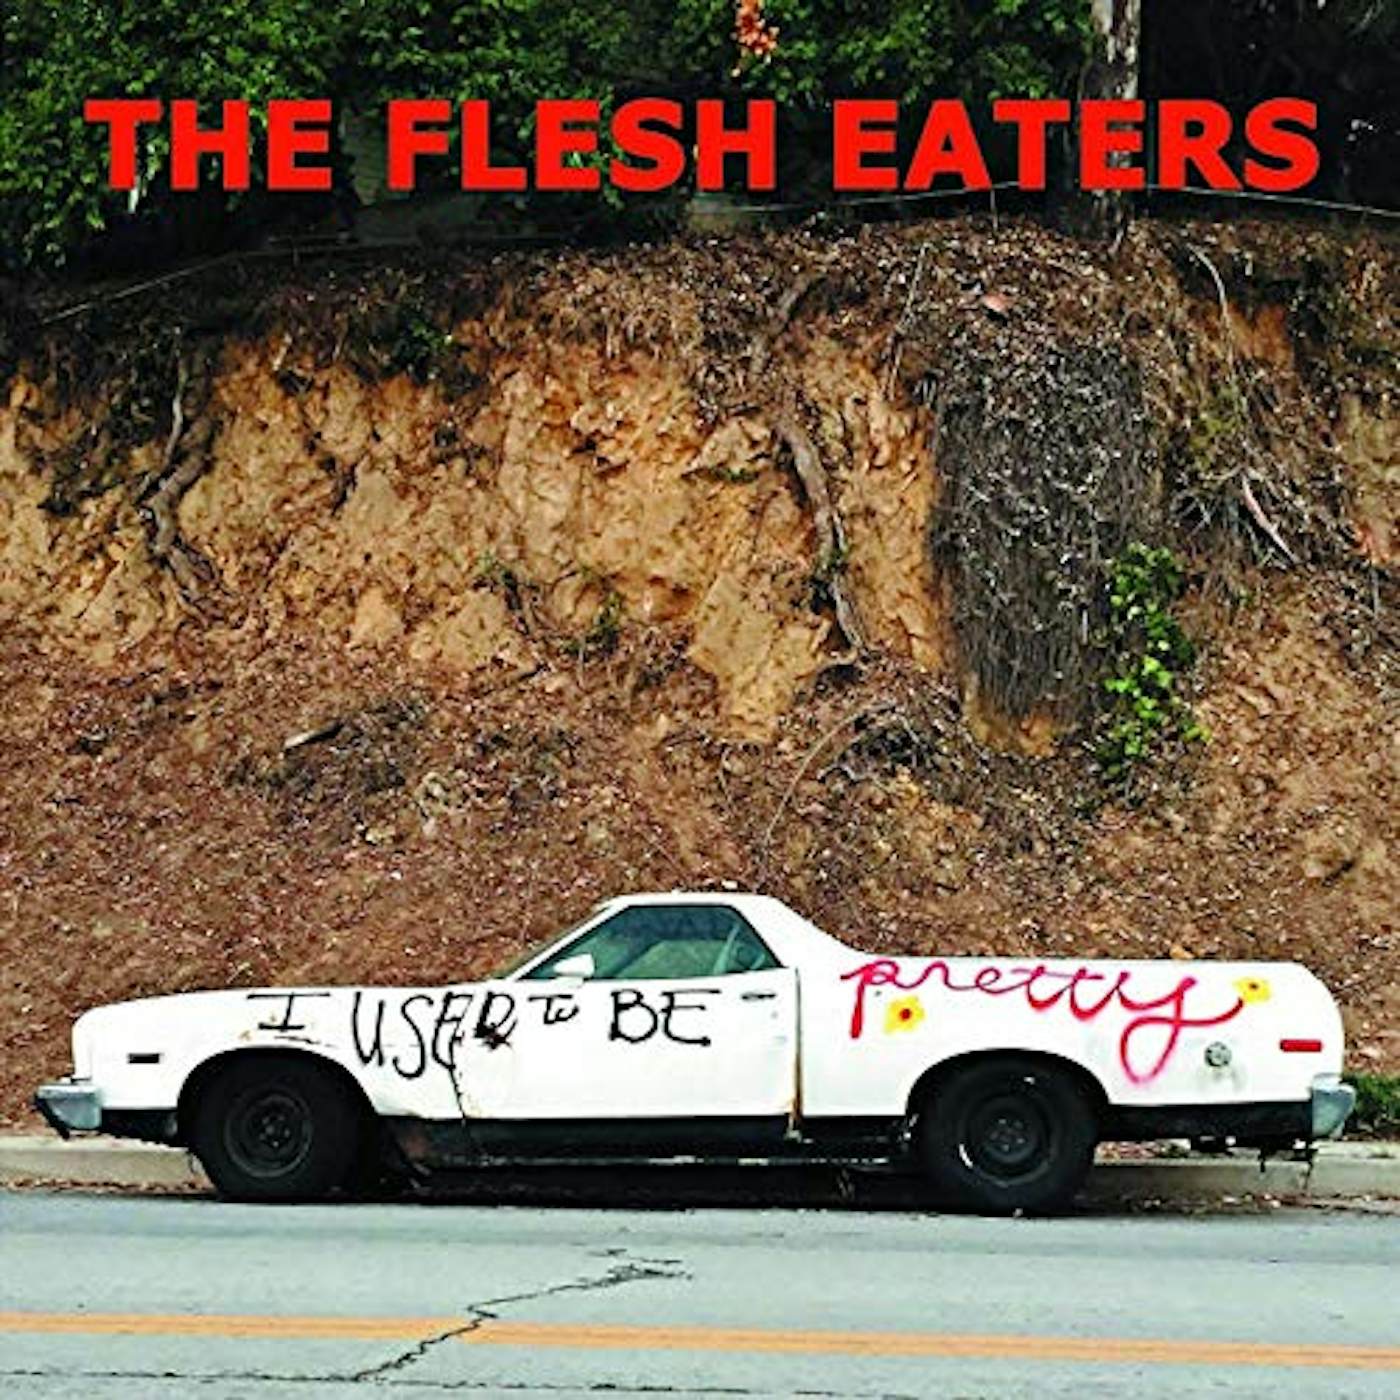 The Flesh Eaters I Used to Be Pretty Vinyl Record